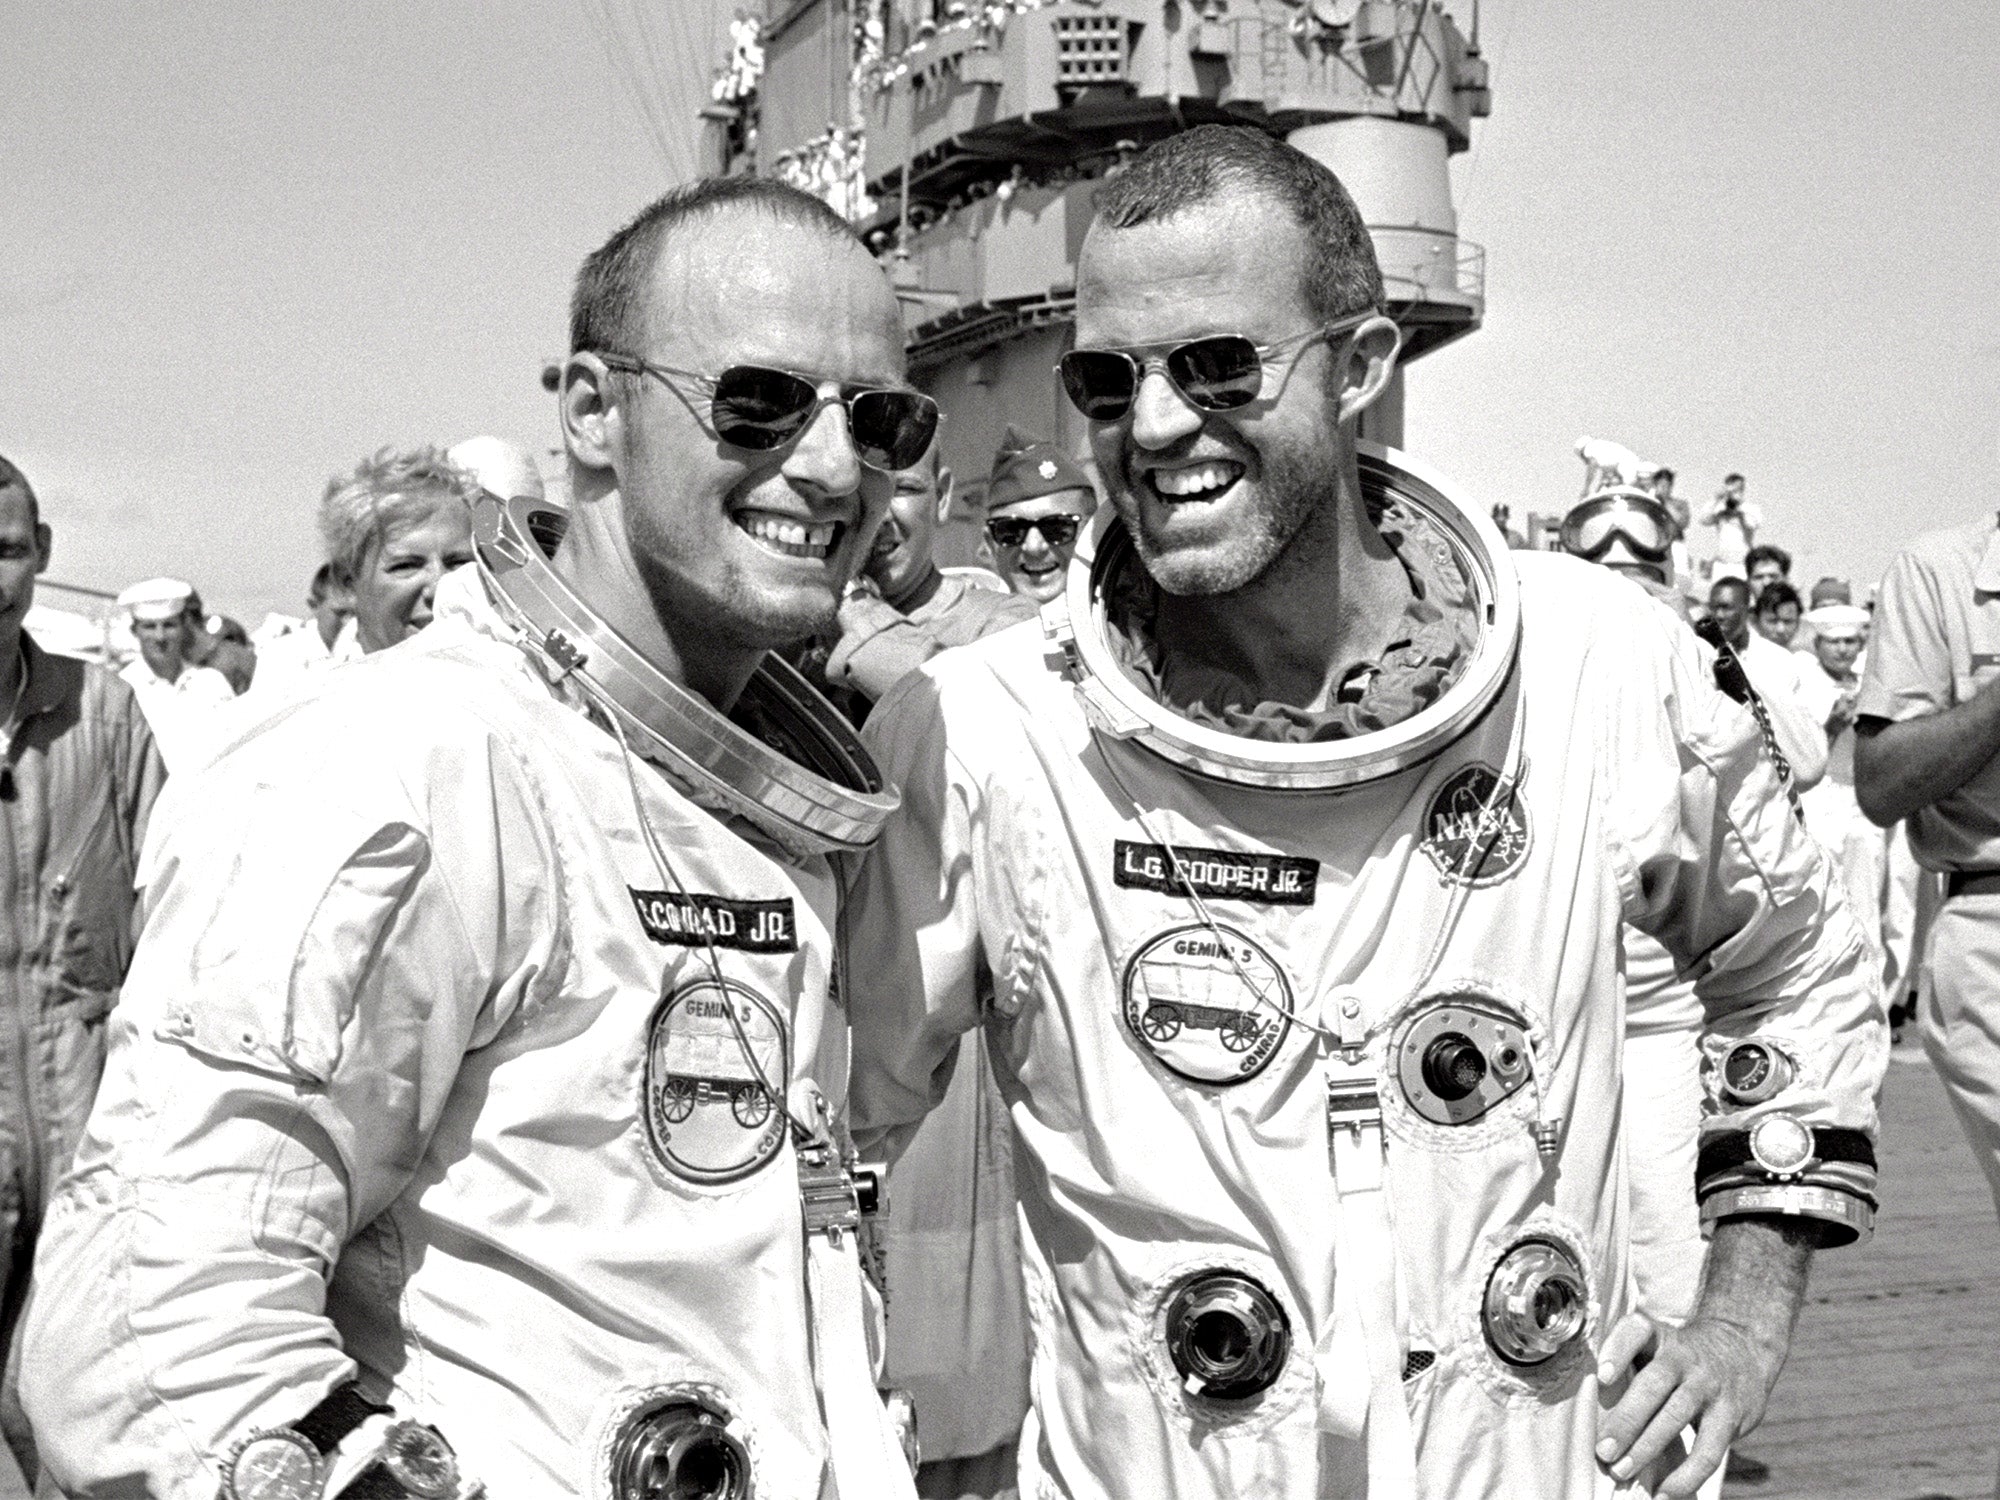 Charles Conrad wore Glycine Airman during on Gemini 5 missions in 1965 